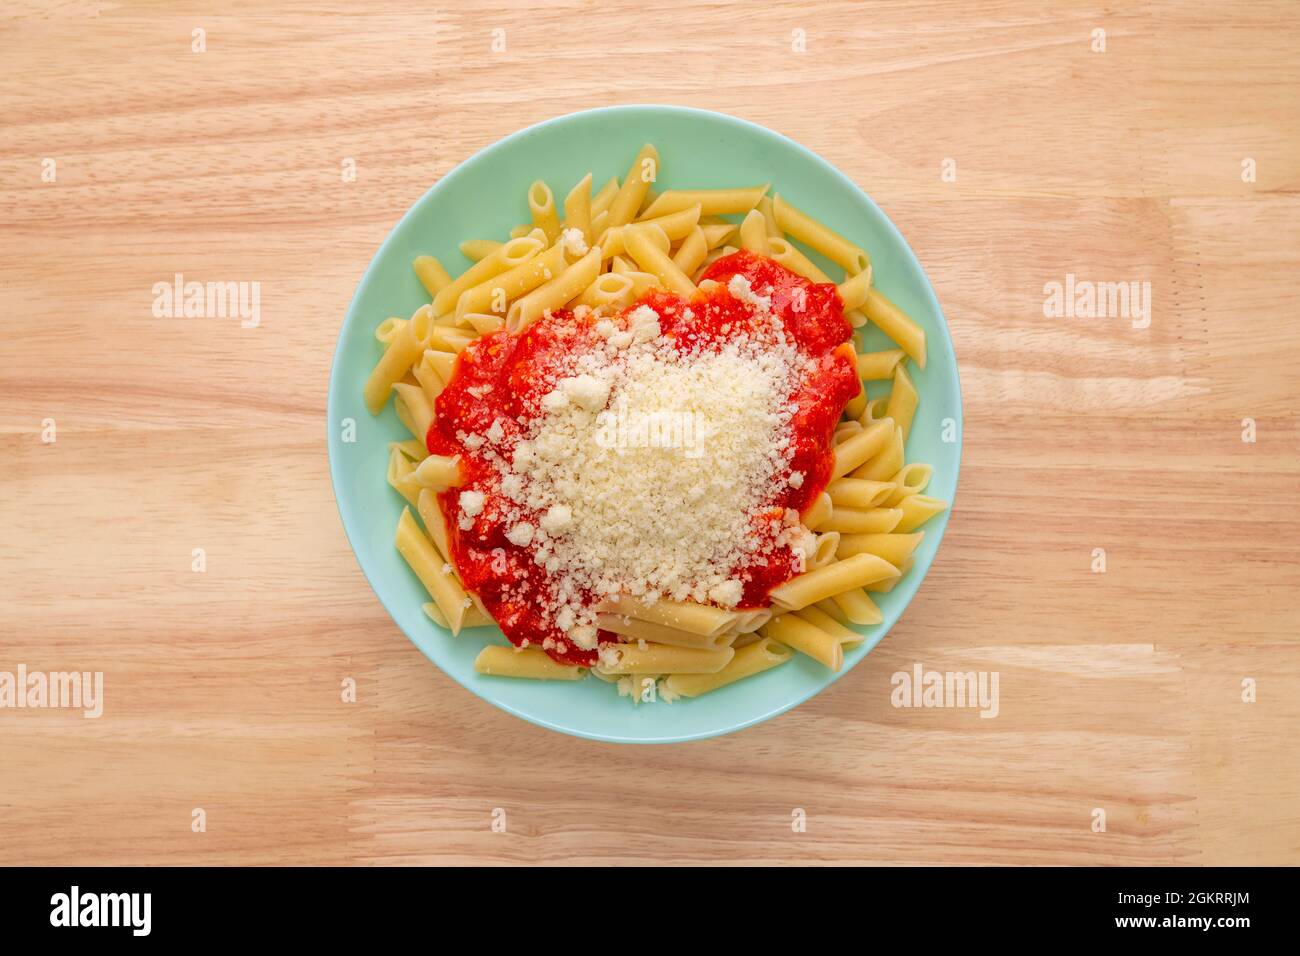 Top view image of cooked macaroni with tomato sauce and parmesan cheese on blue plate and wooden table Stock Photo